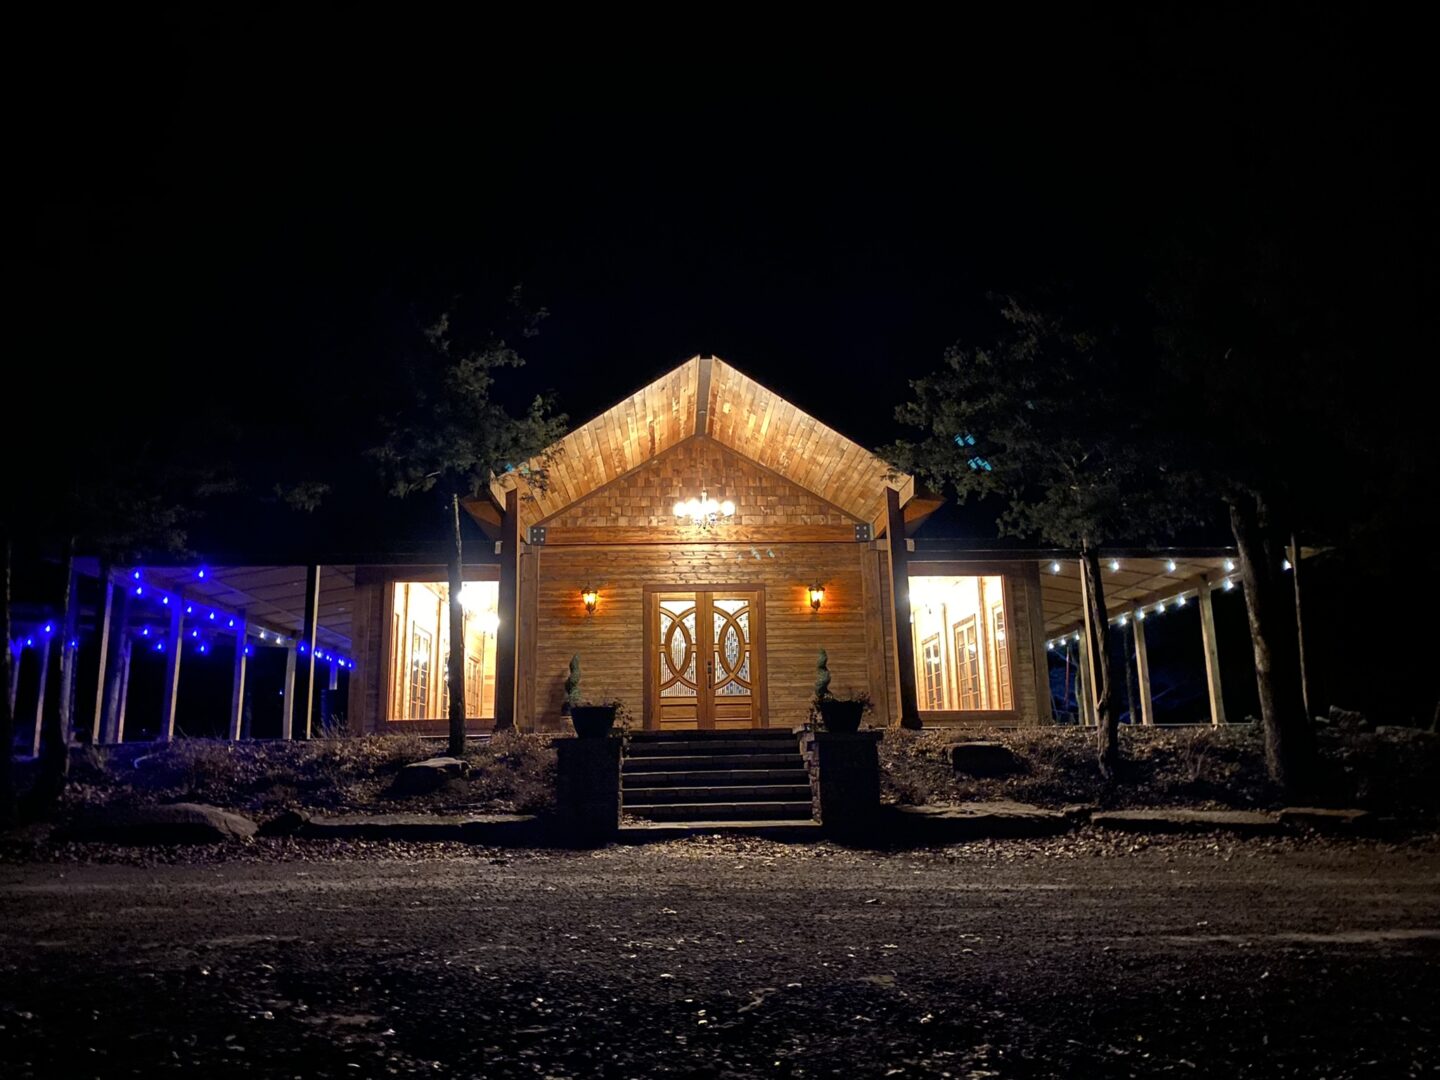 A wooden house with lights on the outside.